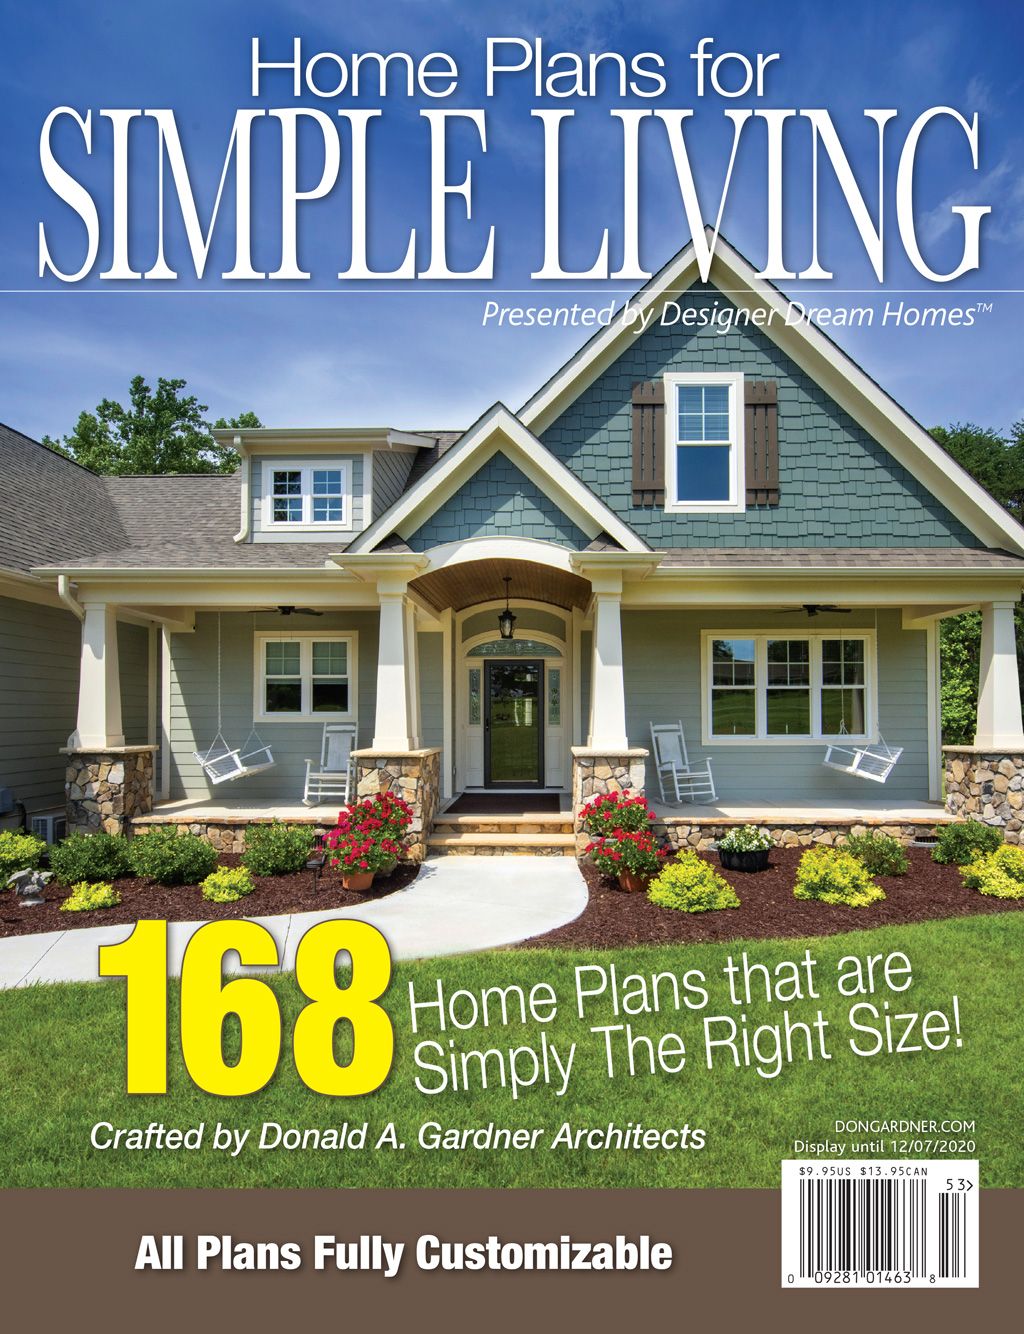 Home Plans for Simple-Living